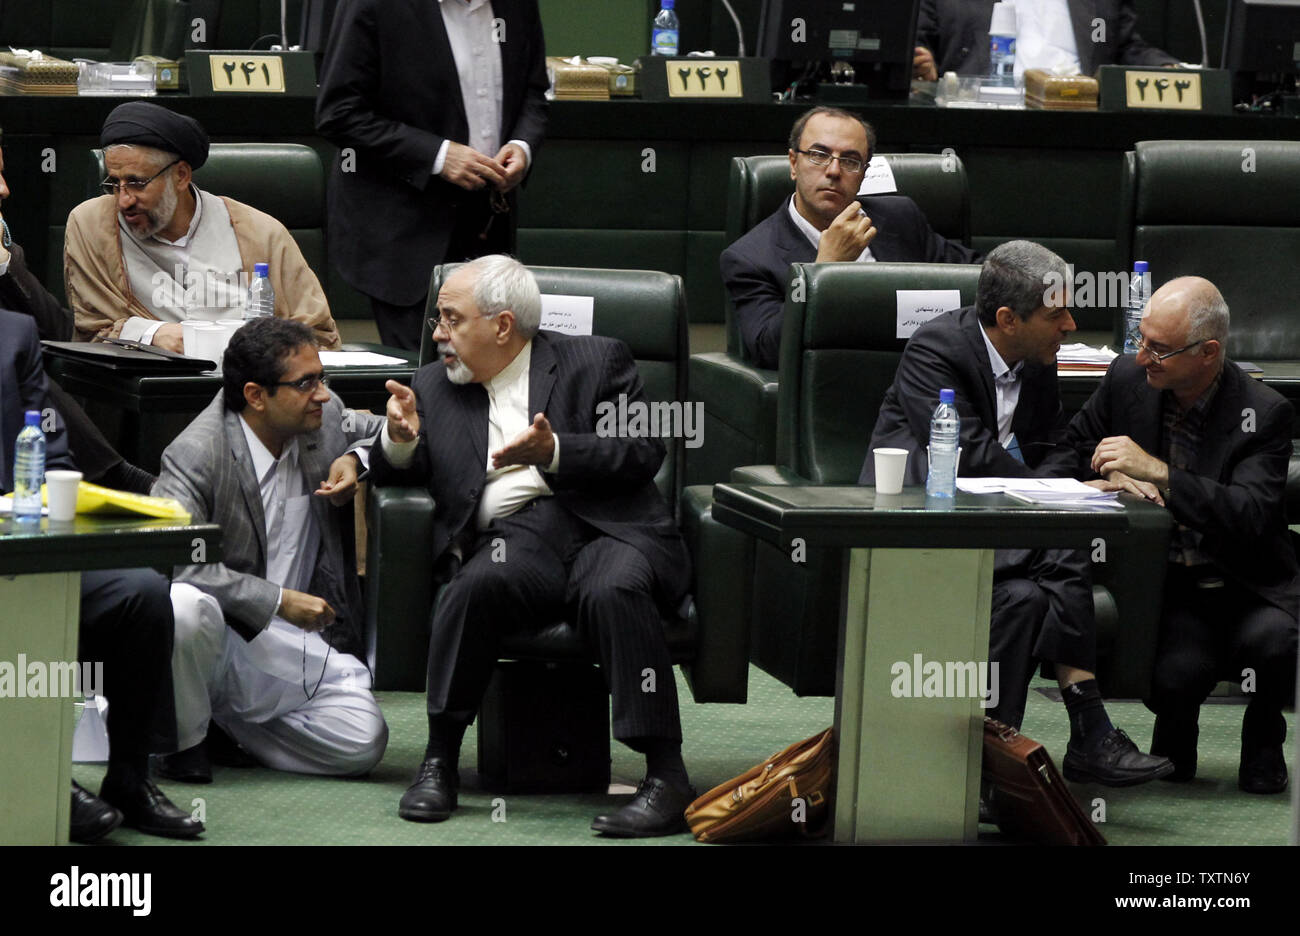 Nominated Iranian Minister of Foreign Affairs Mohammad Javad Zarif (2nd-L) speaks to a lawmaker in parliment on the second day of debate over President Hassan Rouhani's proposed cabinet ministers on August 13, 2013 in Tehran, Iran. All nominated ministers need the majority vote of the 290 deputies before taking office.     UPI/Maryam Rahmanian Stock Photo